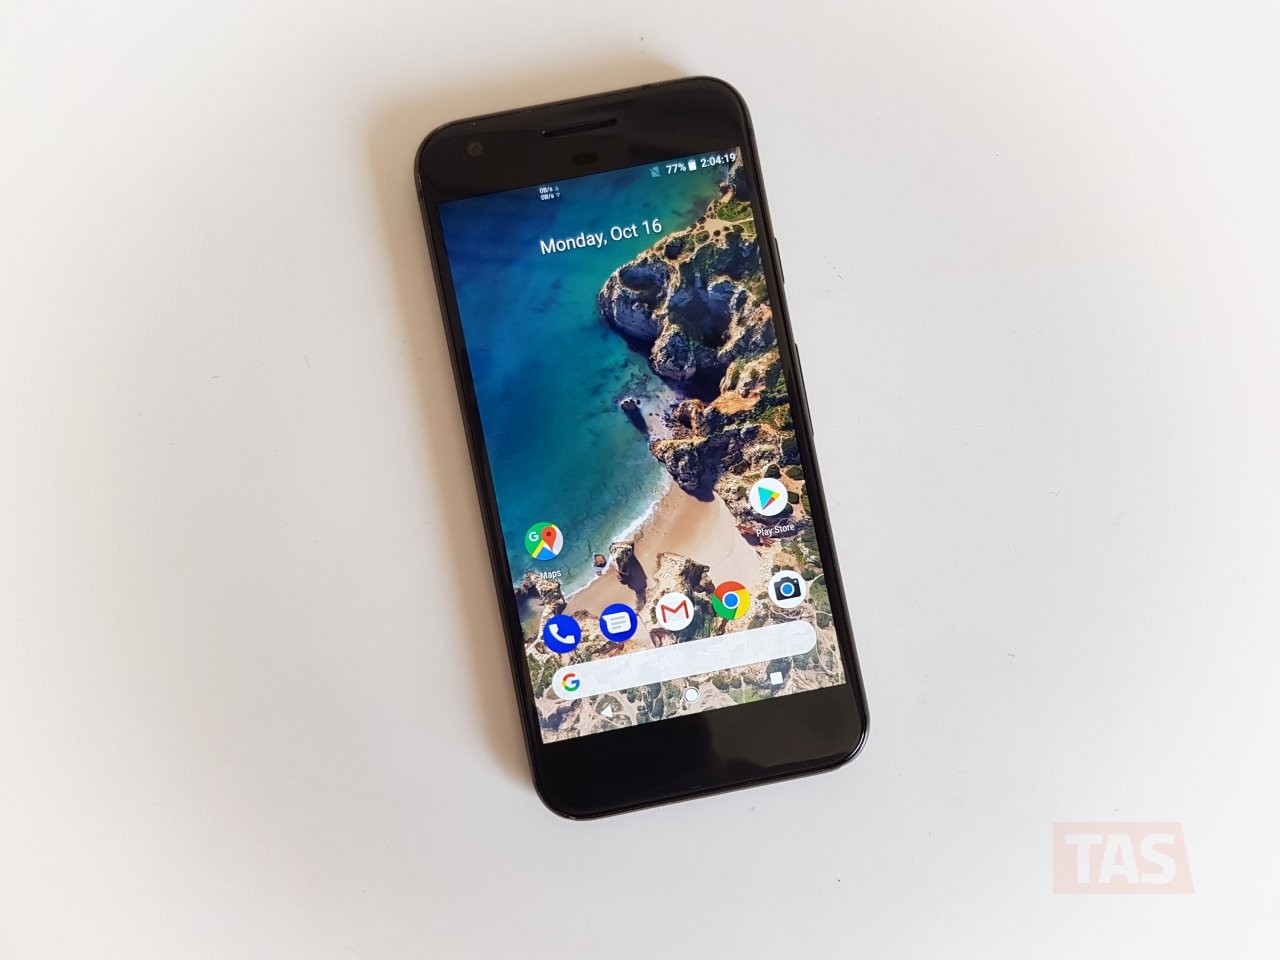 FYI: You cannot remove Google search bar at bottom on Pixel 2 Launcher